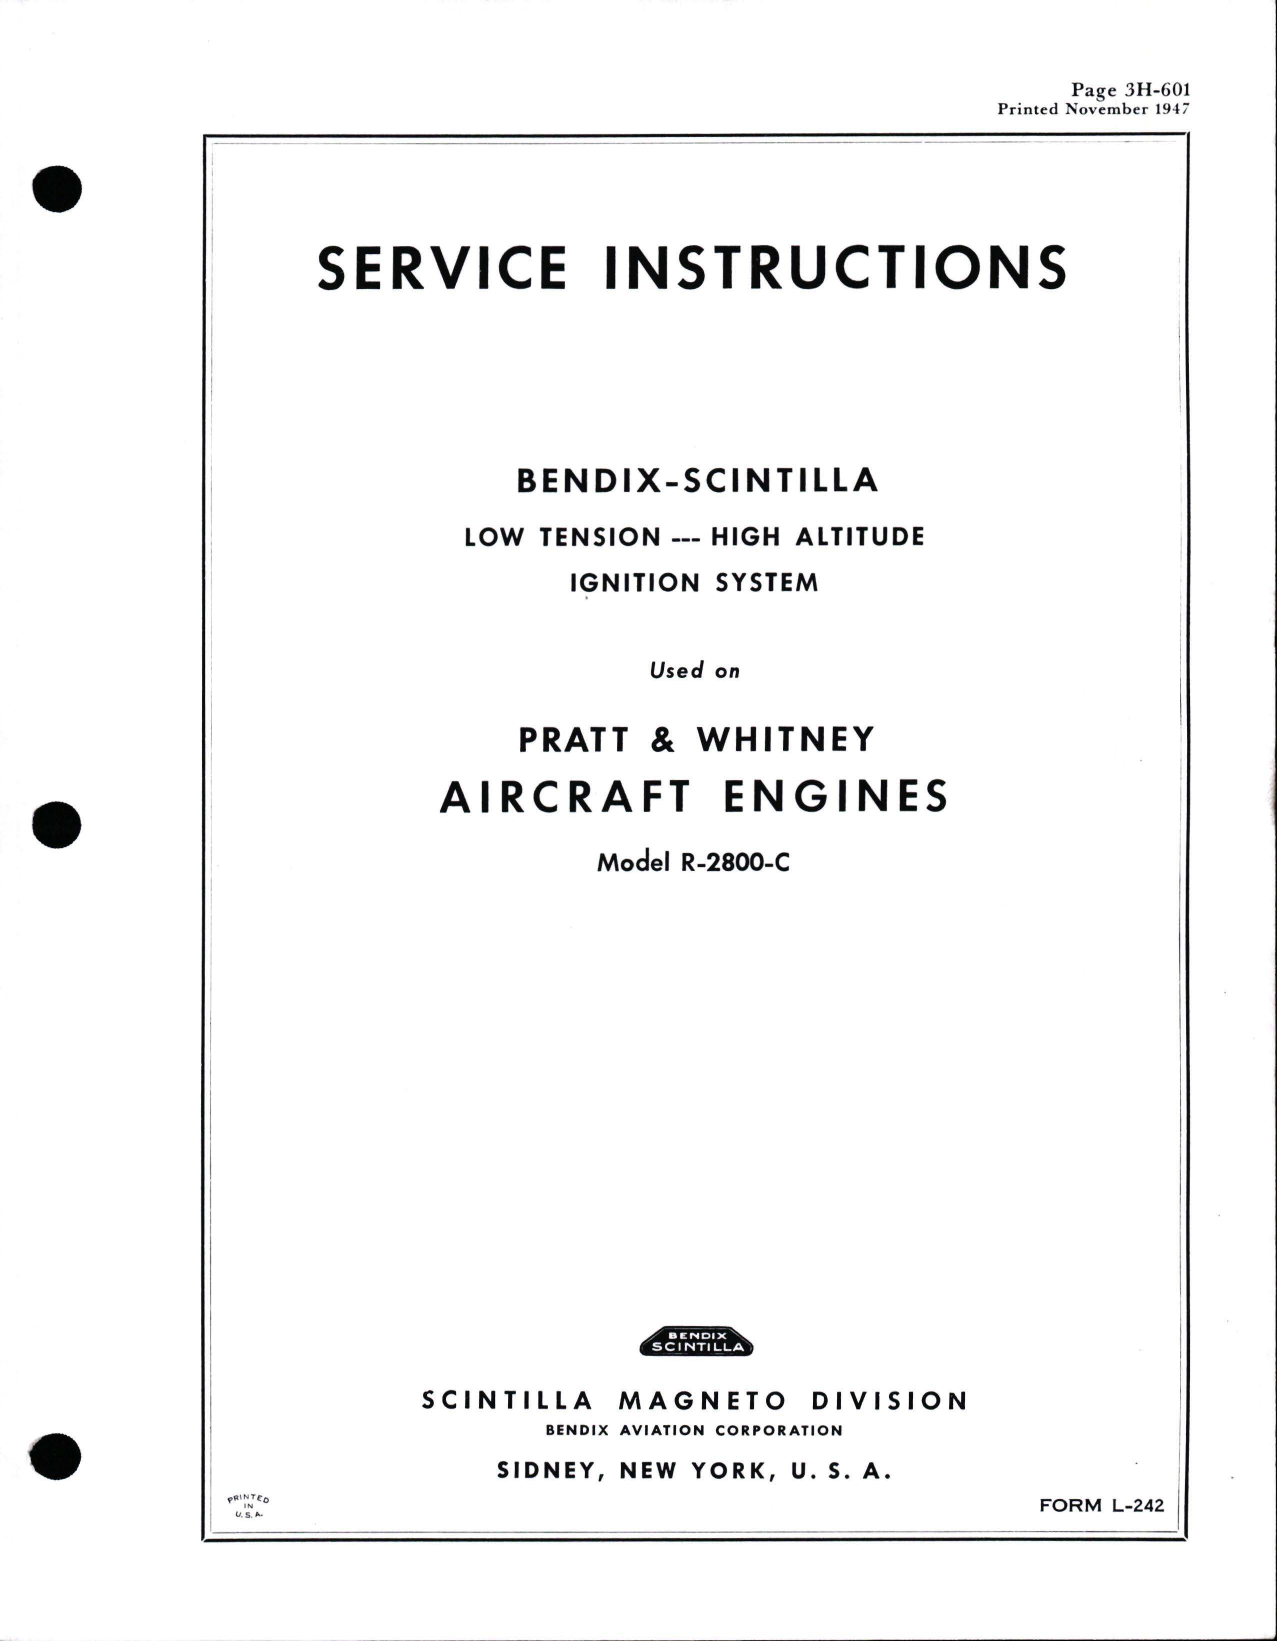 Sample page 1 from AirCorps Library document: Service Instructions for Bendix Scintilla Low Tension - High Altitude Ignition System used on Pratt & Whitney R-2800-C Engines